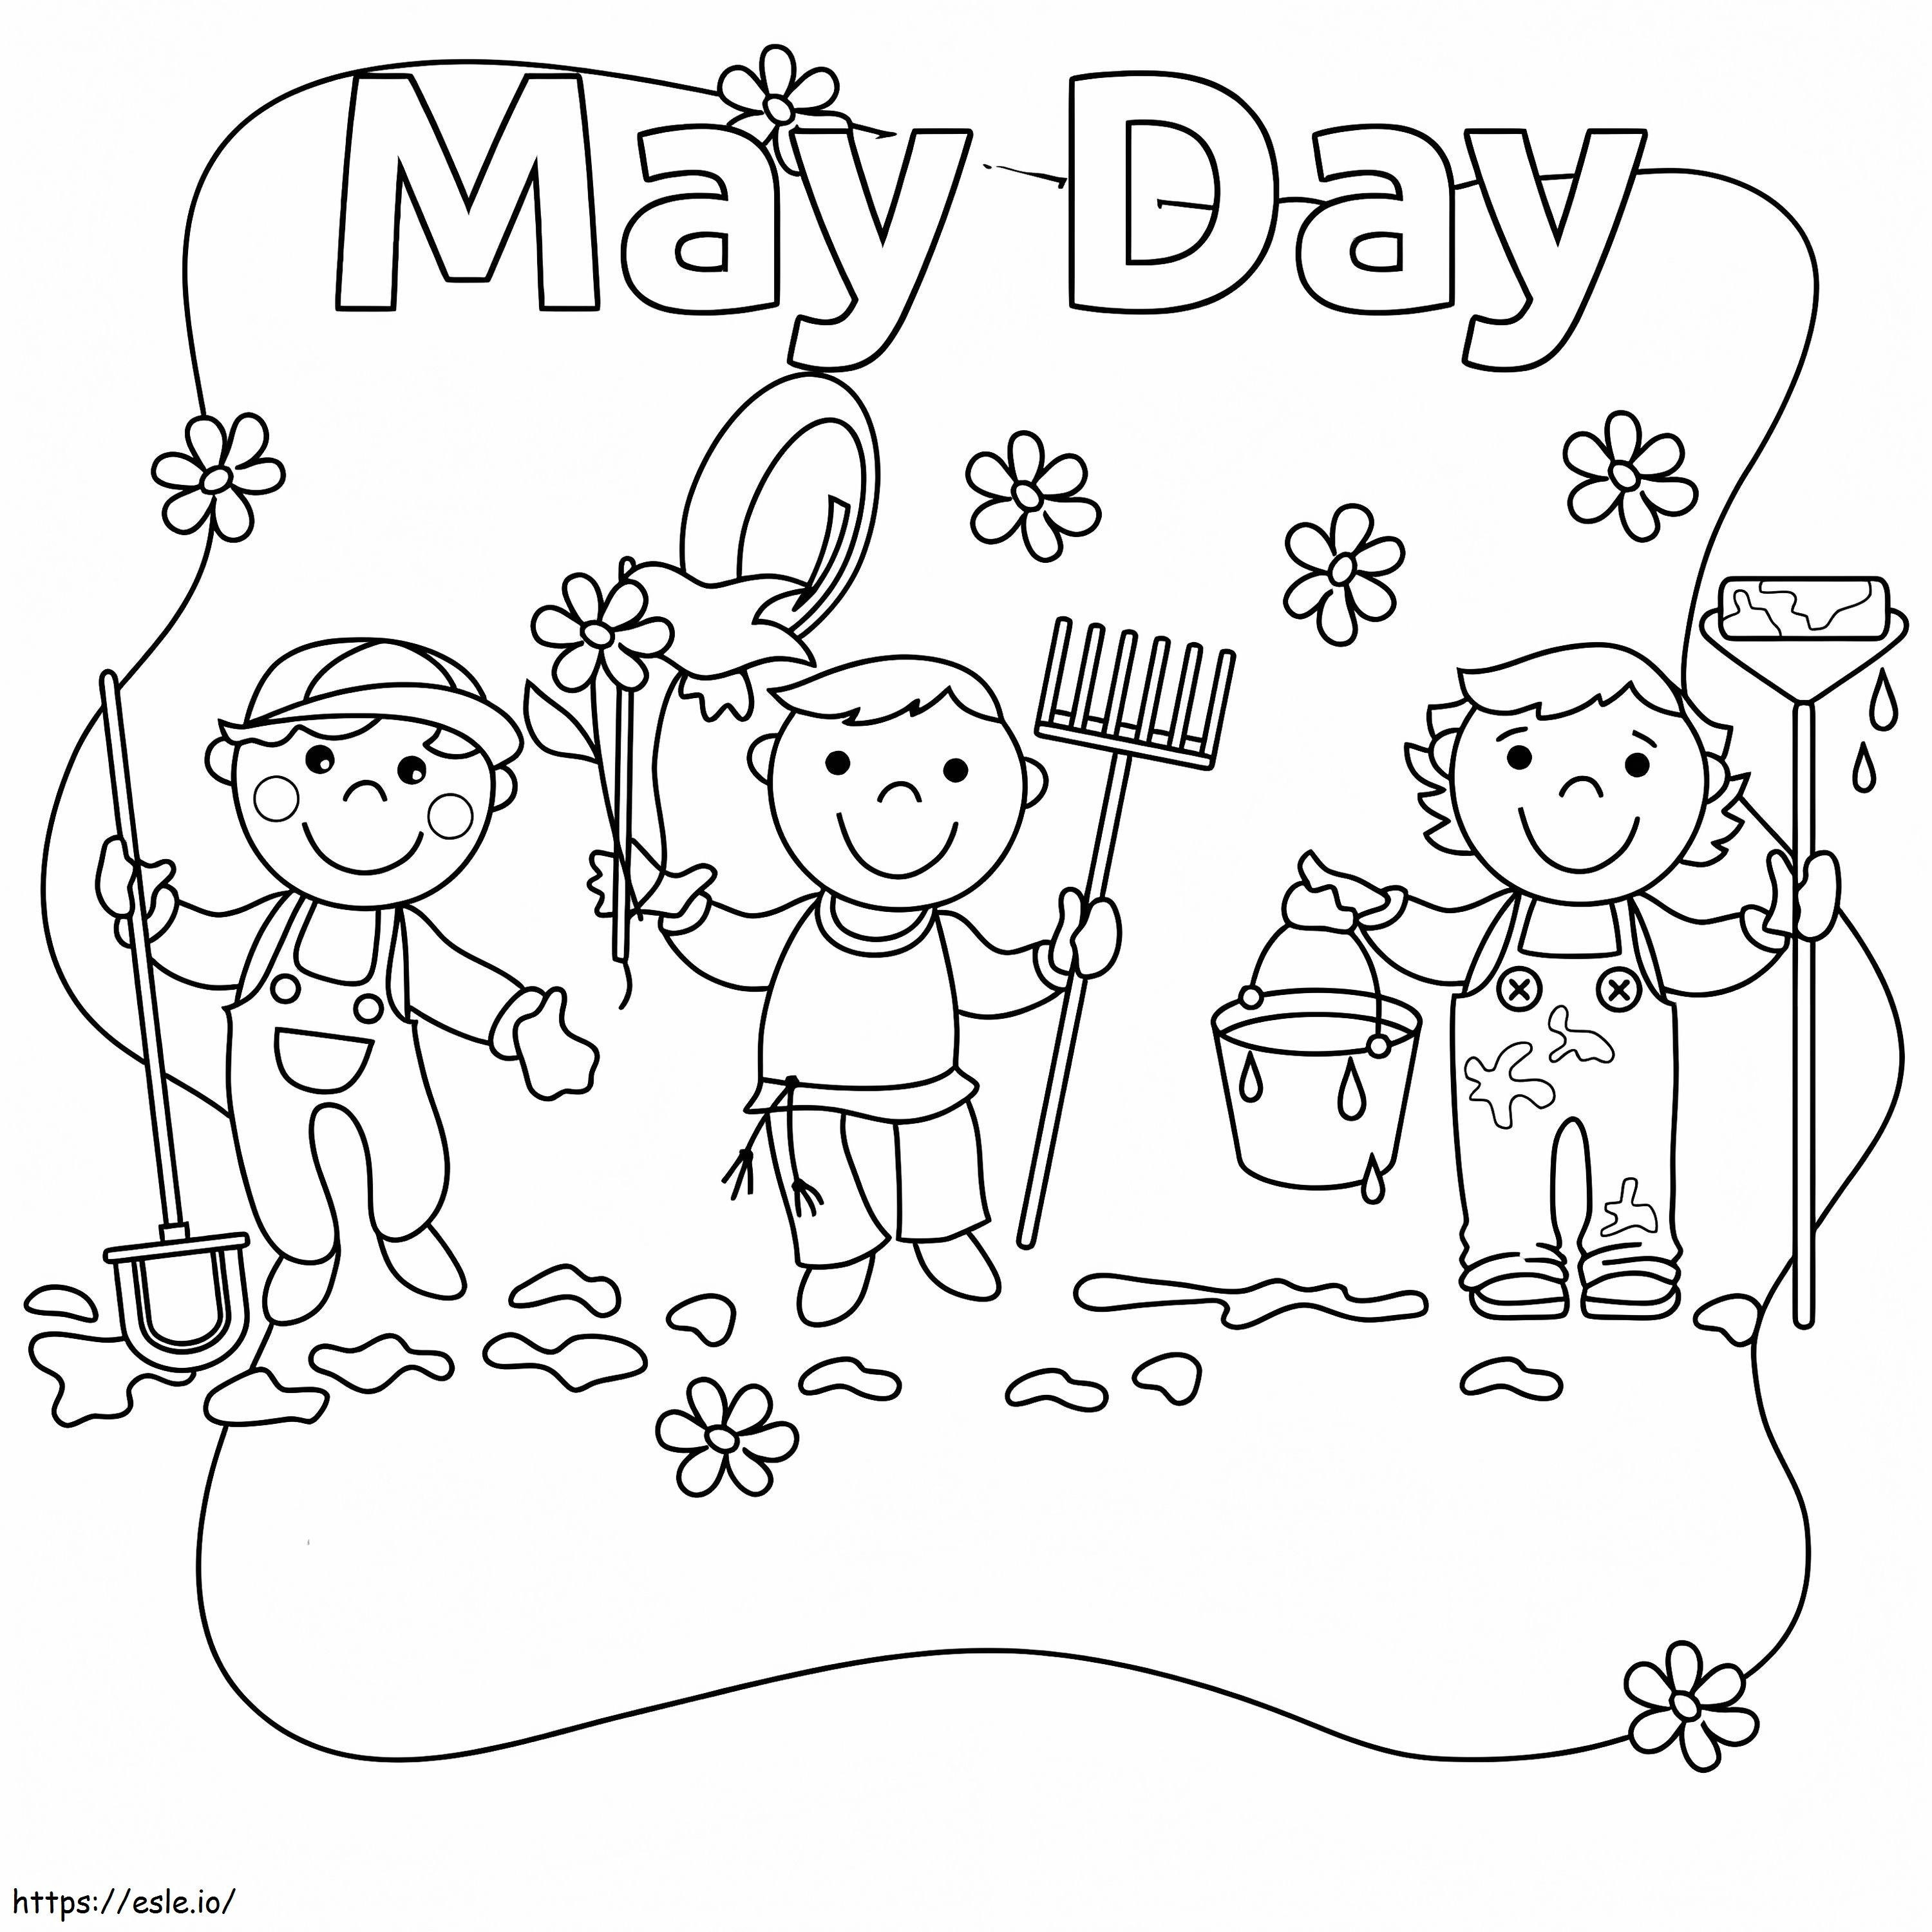 Free Printable May Day coloring page